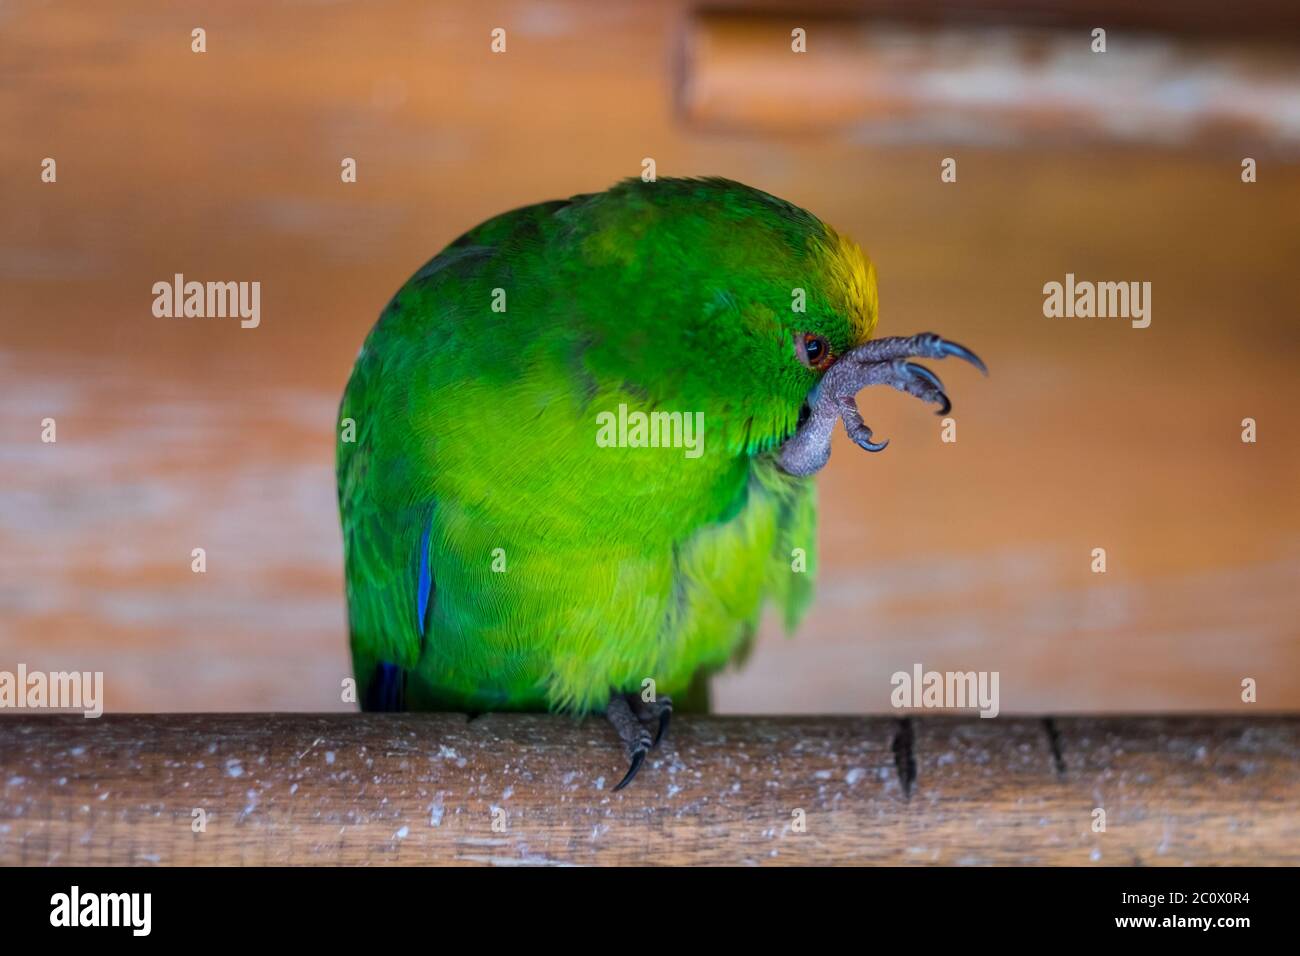 New Zealand yellow-crowned parakeet (Cyanoramphus auriceps). One of New Zealand's endemic parrot species. Stock Photo